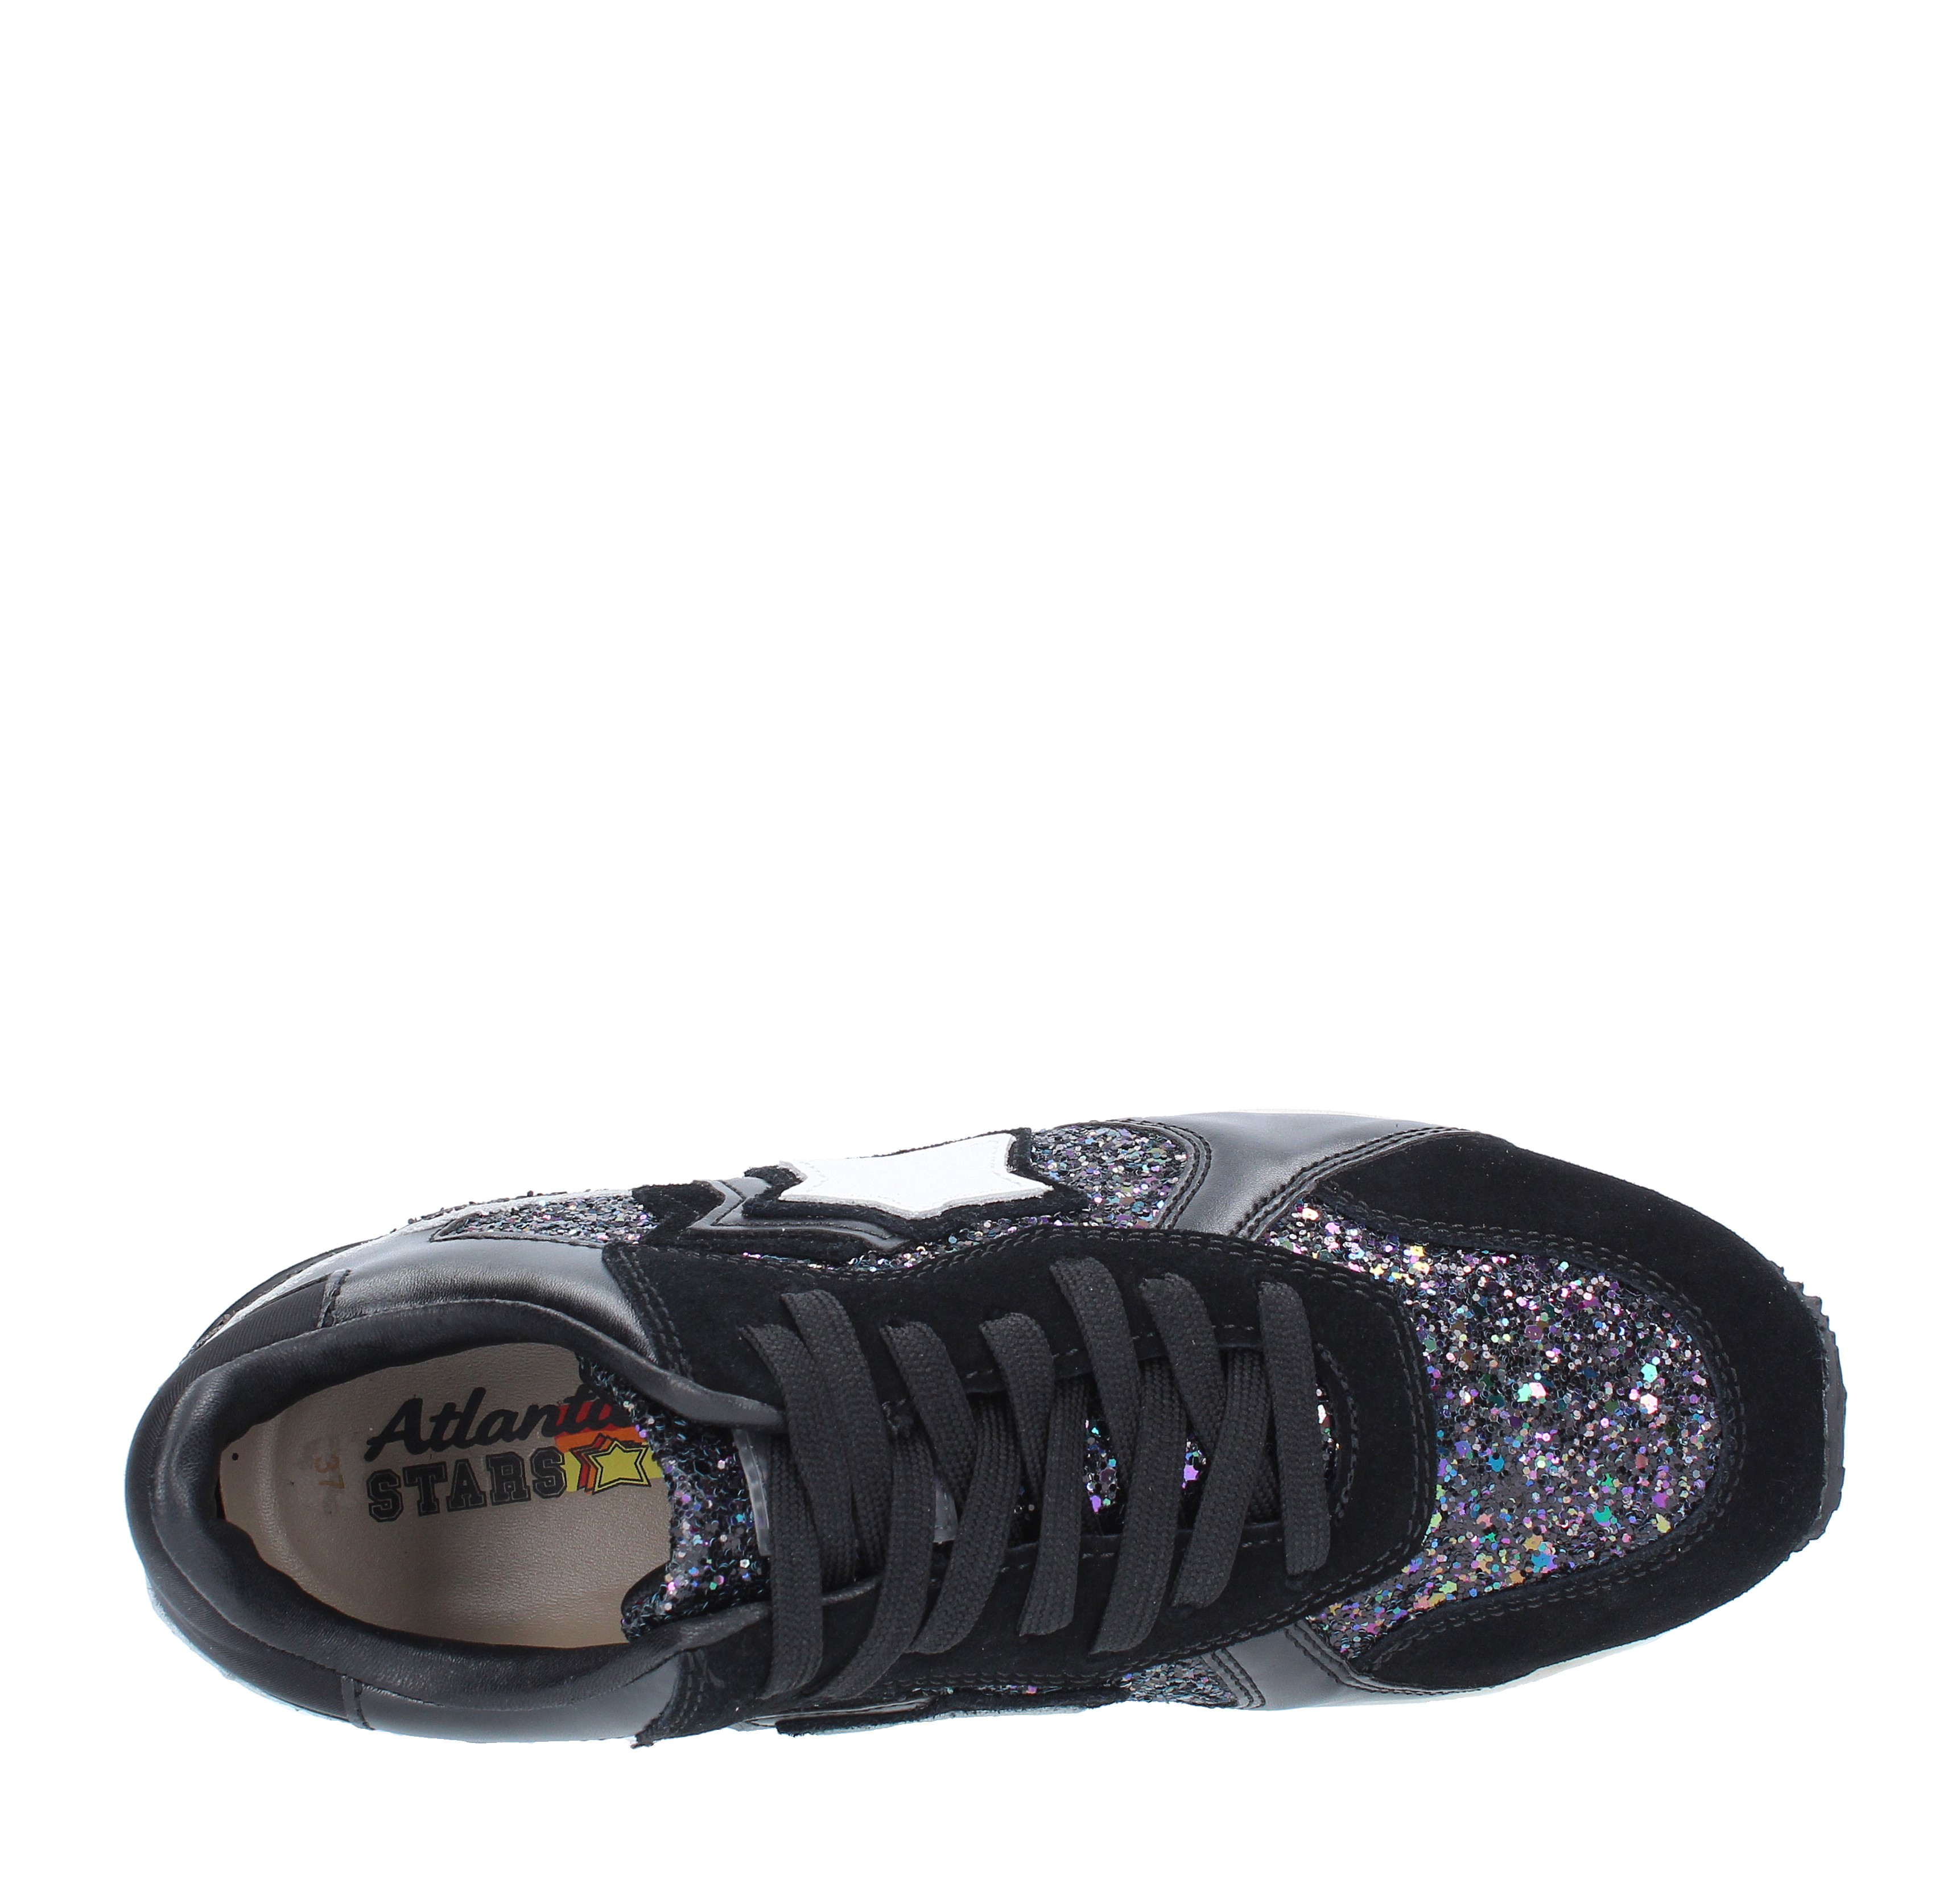 ANDRC NPNP model trainers in suede leather and fabric ATLANTIC STARS | ANDRC NPNP LSNRNERO